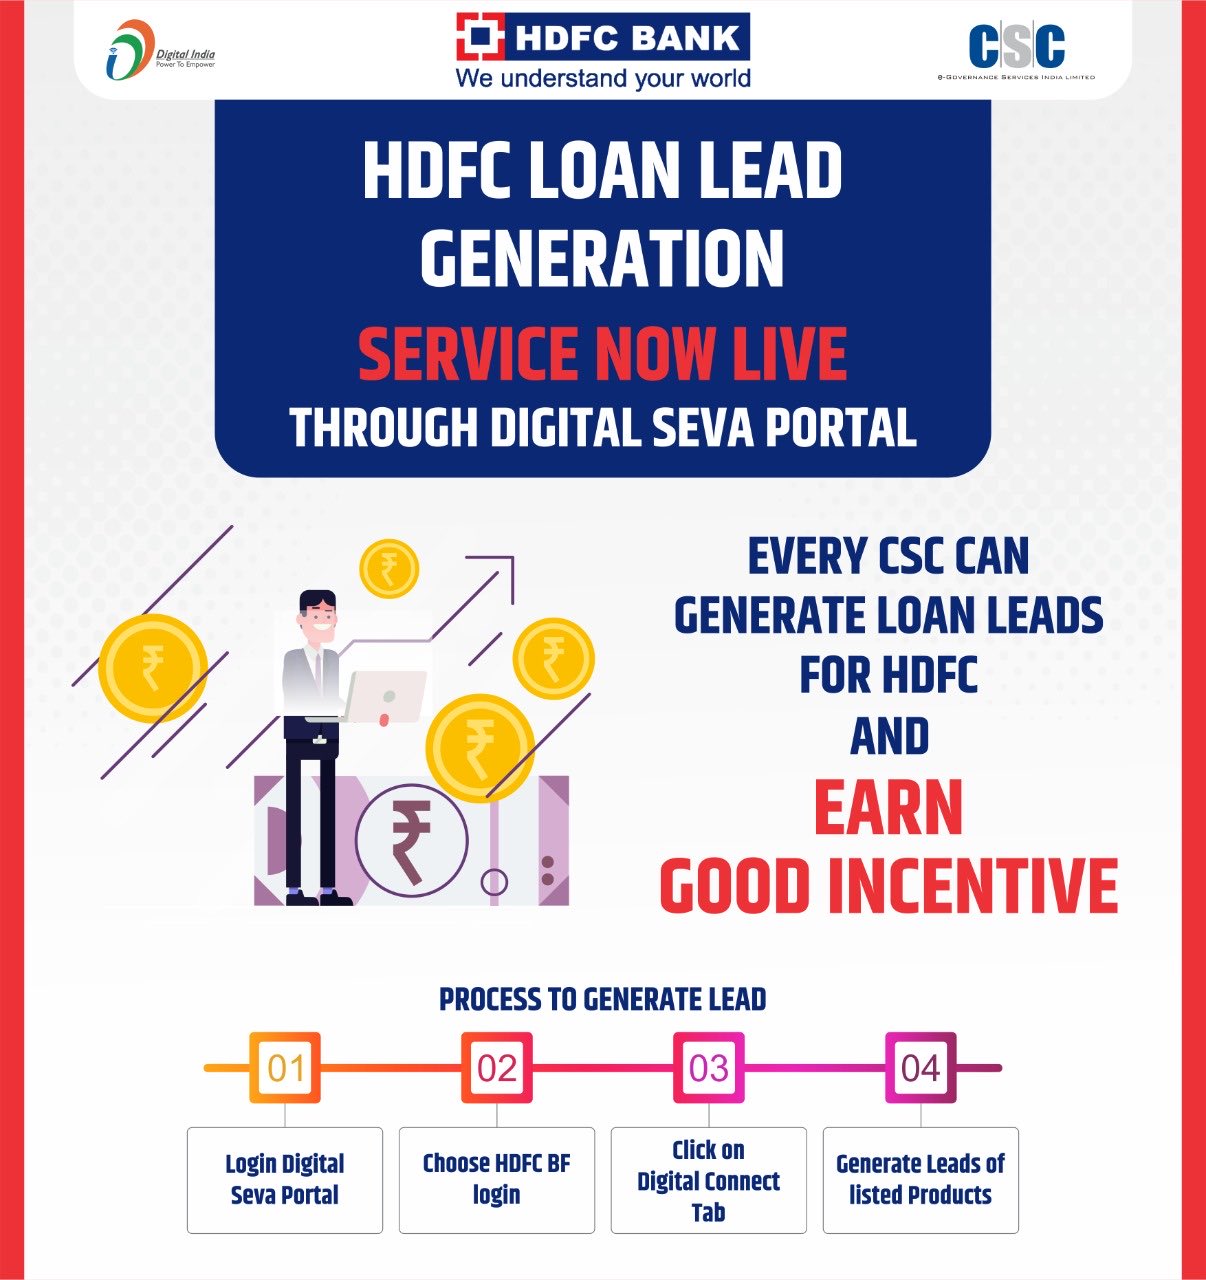 alarm sorg Ordsprog CSCeGov on X: "HDFC Loan Lead Generation Service Now Live Through Digital  Seva Portal... Every CSC Can Generate Loan Leads For #HDFC And Earn Good  Incentive... #CSC #DigitalIndia #RuralEmpowerment #mondaythoughts  #MondayMotivation #Mondayvibes